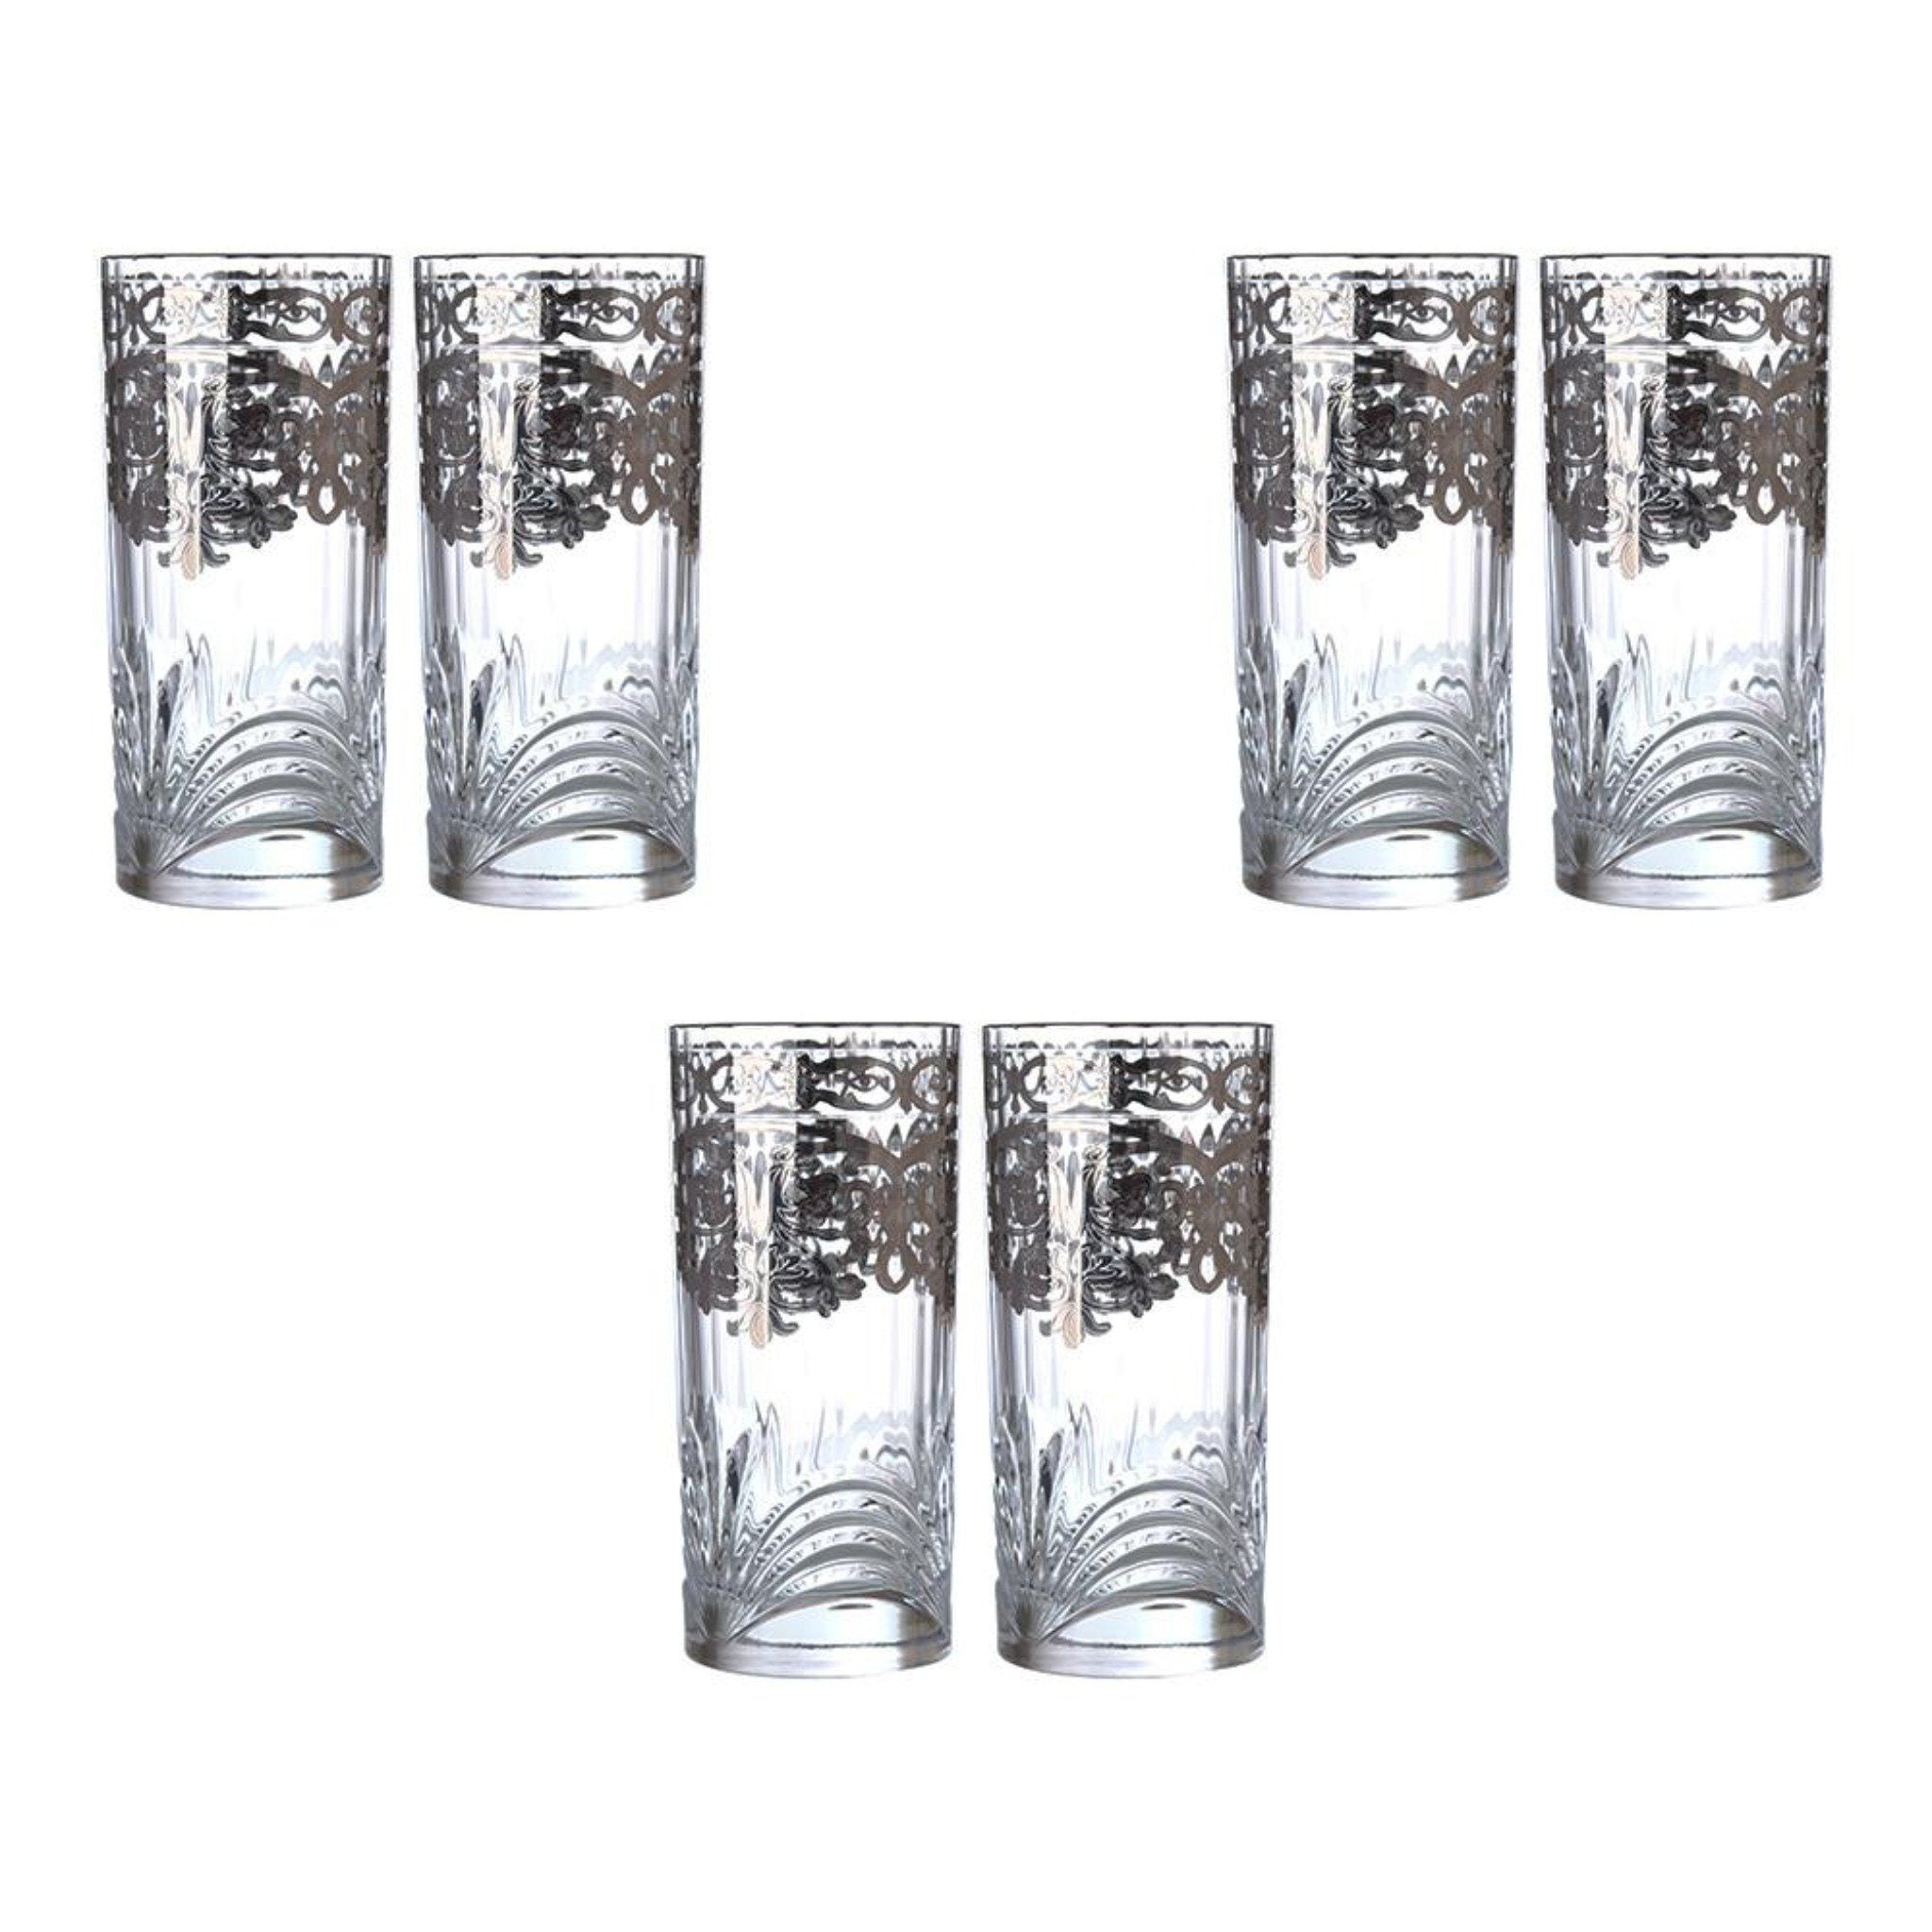 RCR Italy - Highball Glass Set 6 Pieces - Silver - 370ml - 380003068